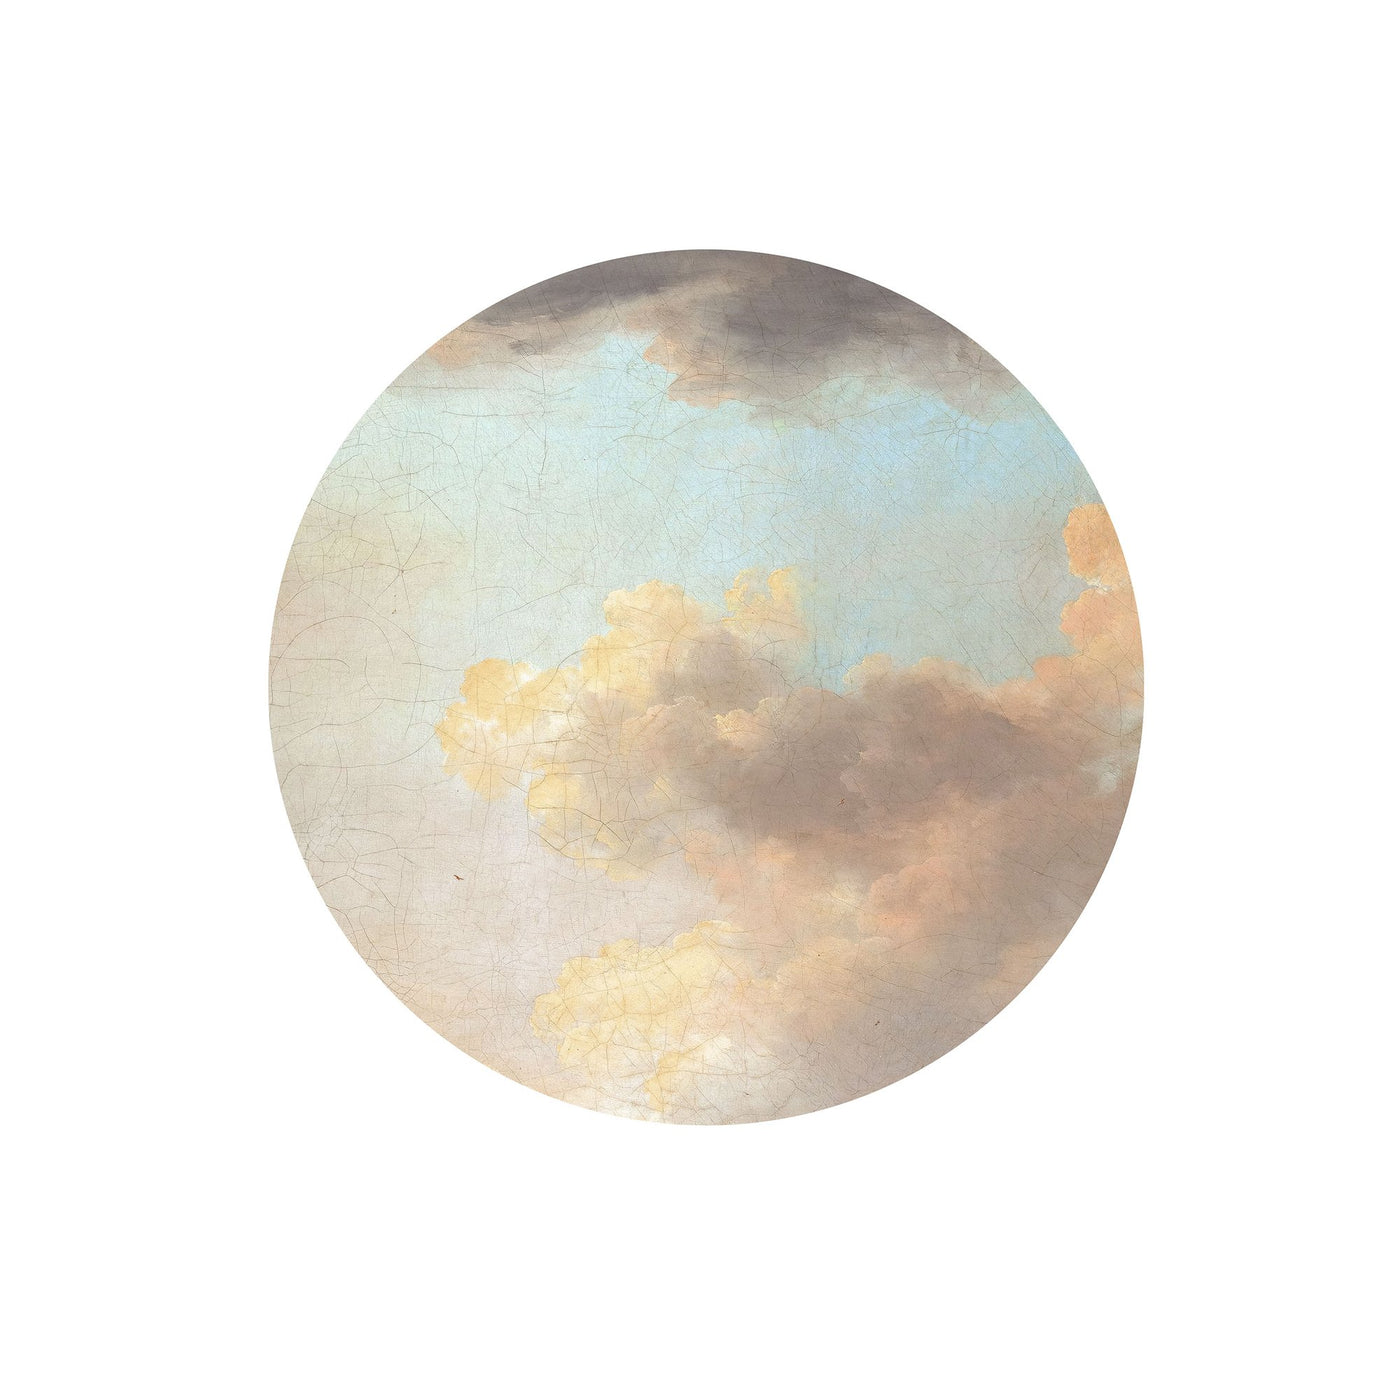 Cumulus Clouds Circle Wall Art (Self-Adhesive)-Wall Decor-ABSTRACT WALLPAPERS, ART WALLPAPER, CIRCLE WALL ART, ECO MURALS, NATURE WALL ART, PATTERN WALLPAPERS, SUSTAINABLE DECOR-Forest Homes-Nature inspired decor-Nature decor